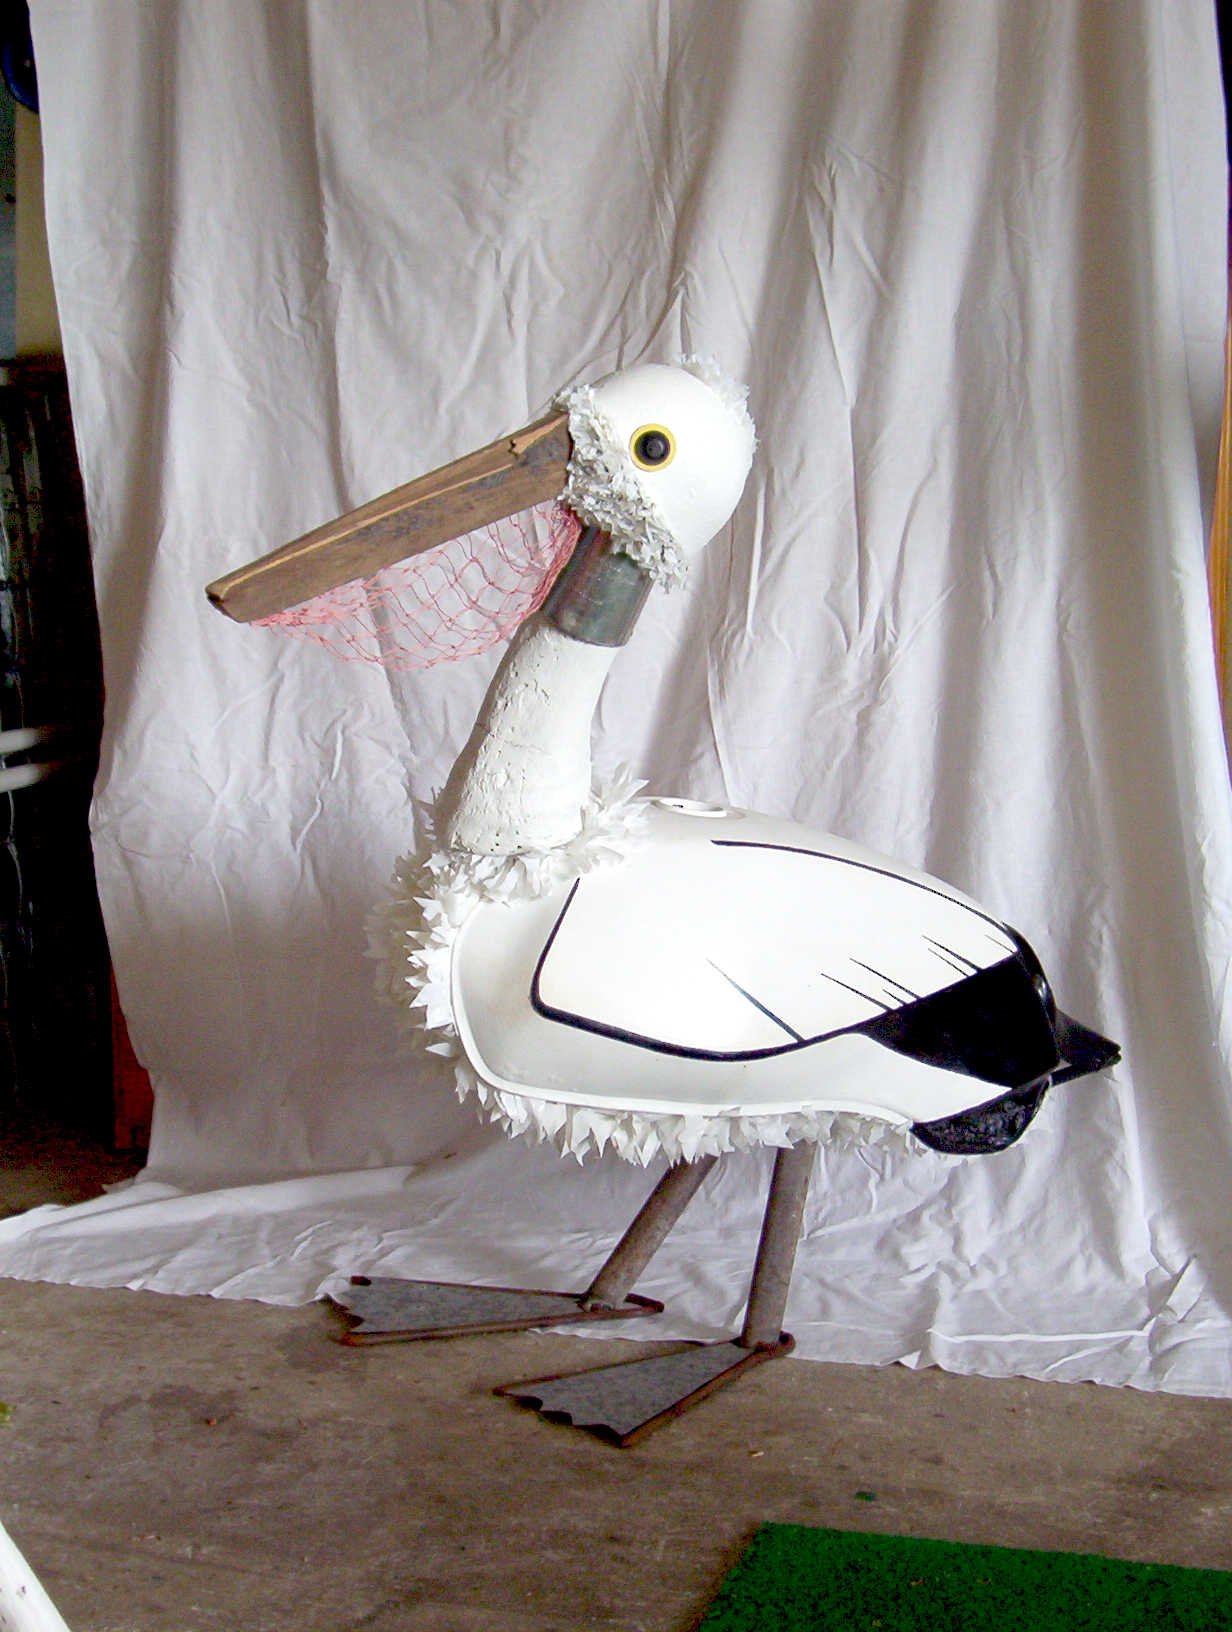 Pelican from 'Waterbirds' by Libby Bloxham. This sculpture is assembled from found and recycled objects including a motorbike fuel tank and mesh produce bags, drawing attention to the troubled relationship of human behaviour with our surrounding wildlife.